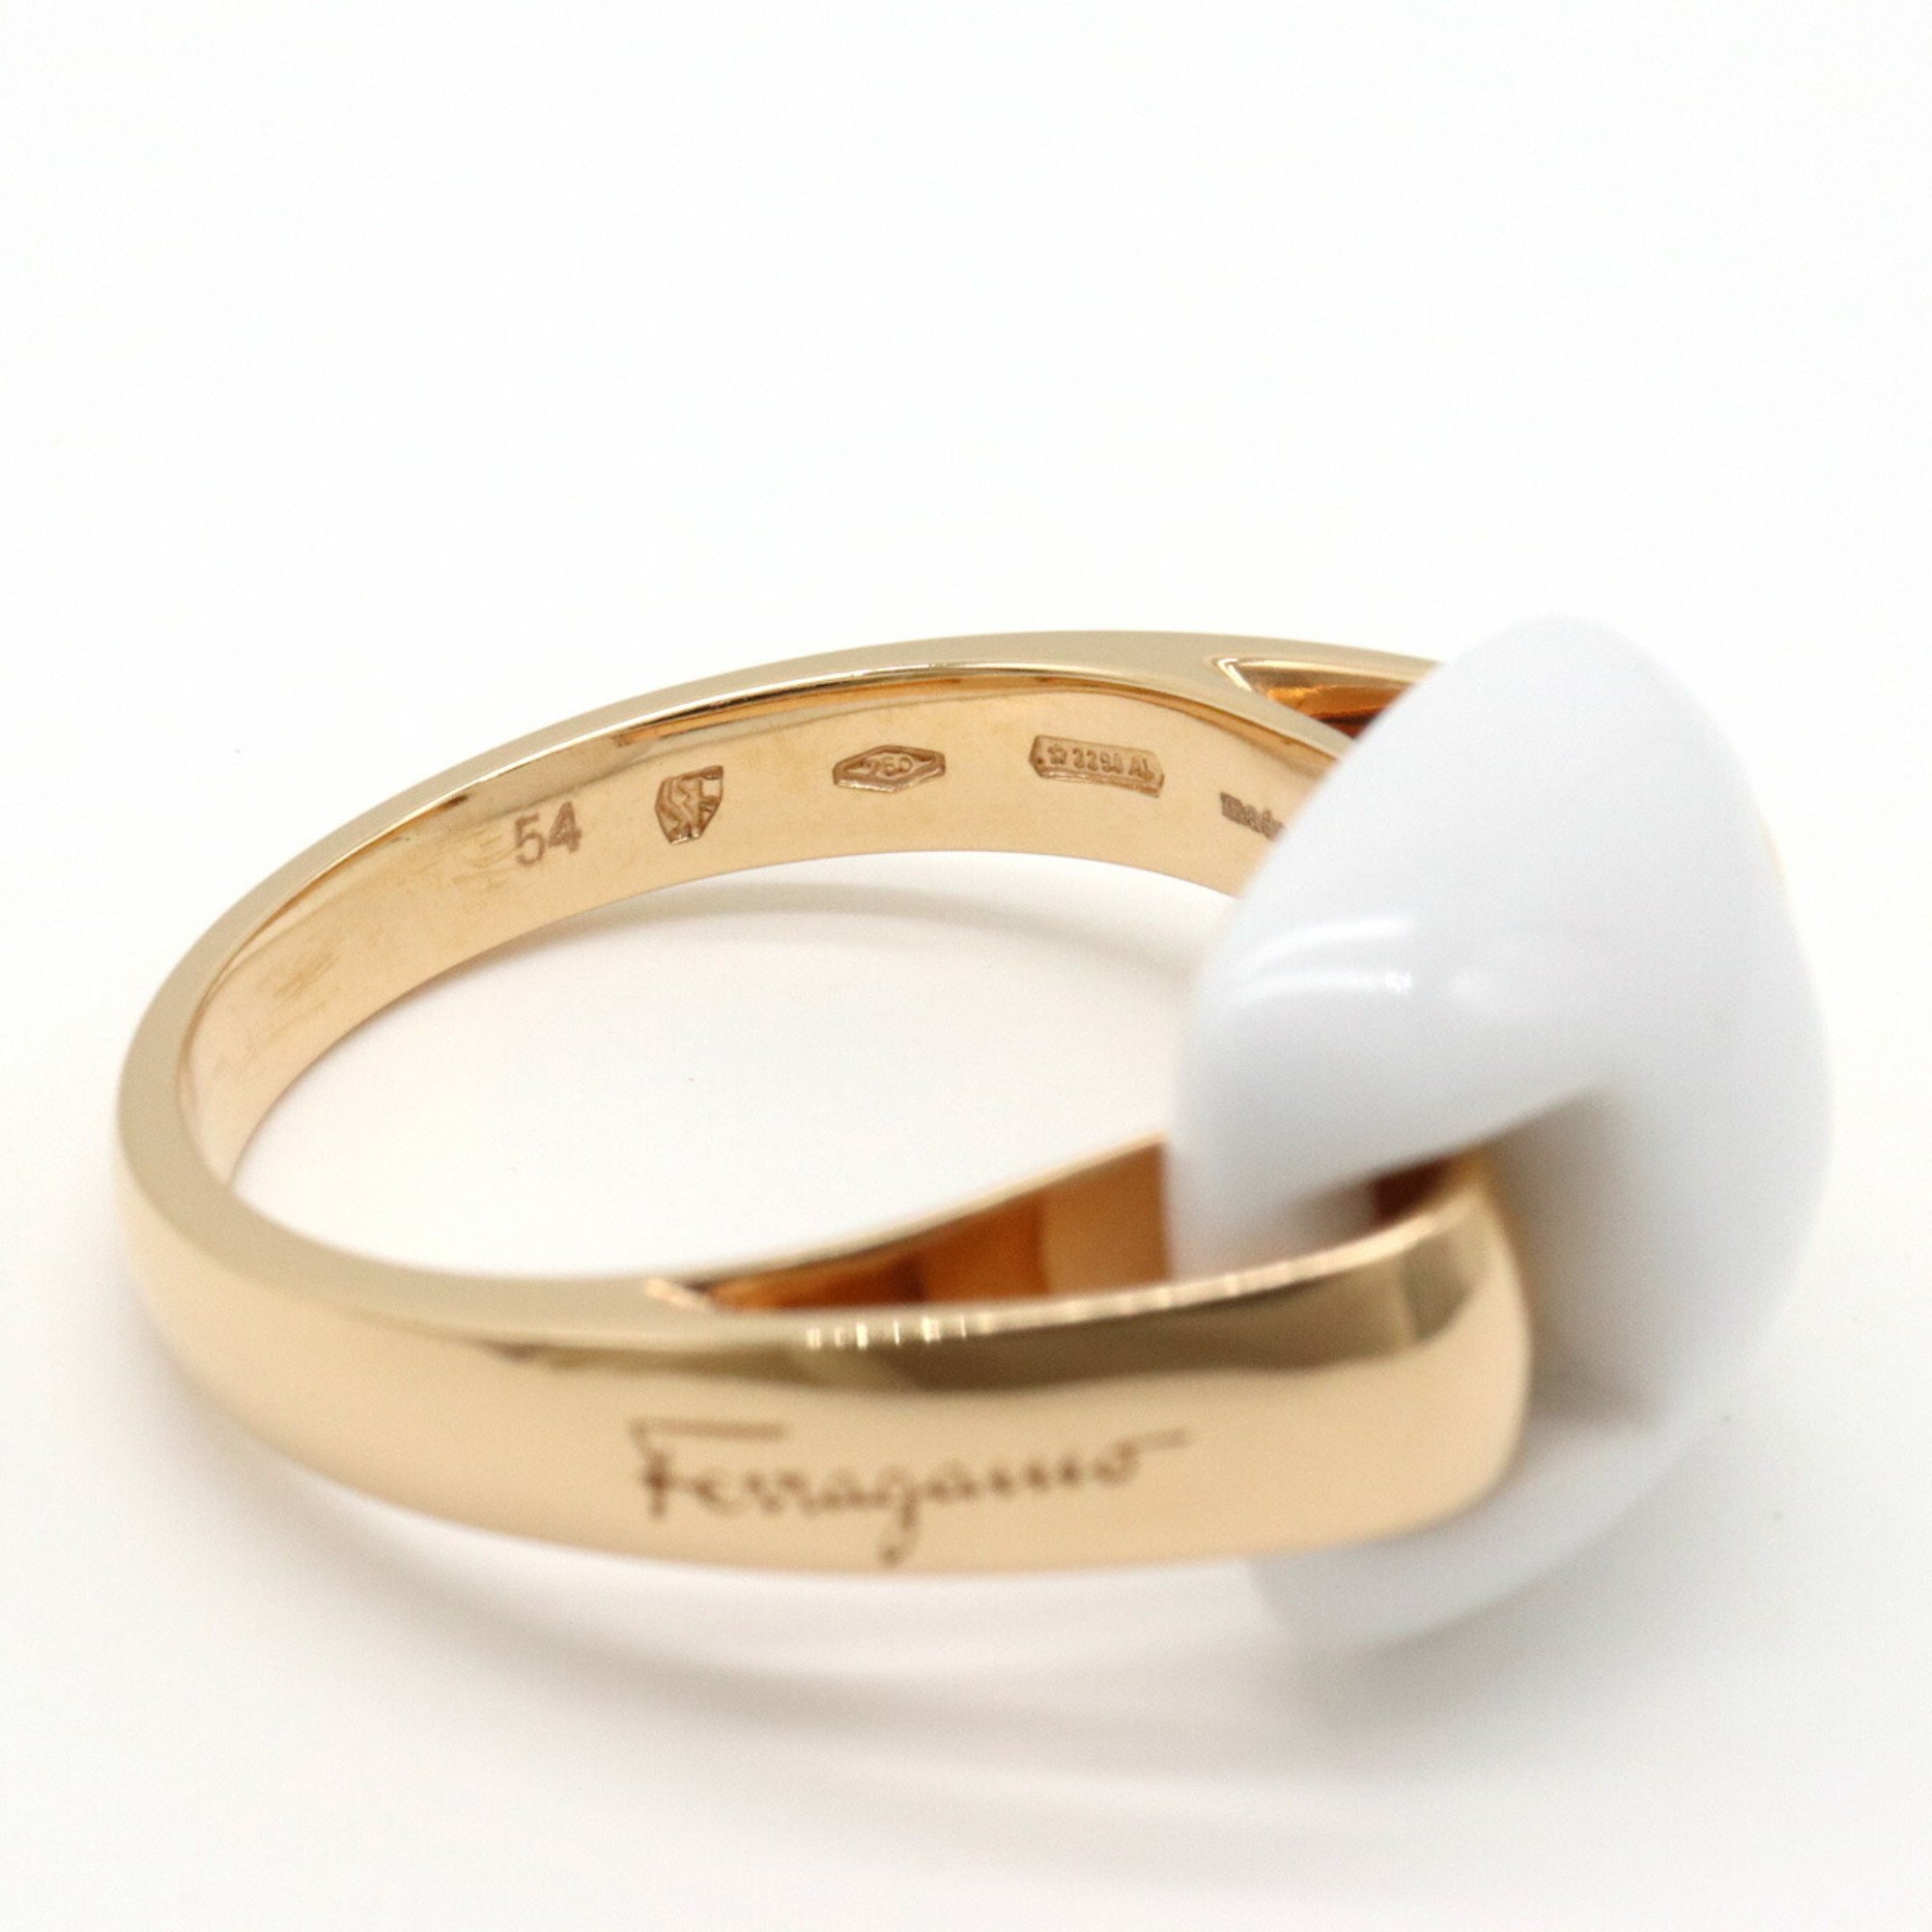 Salvatore Ferragamo Ring, K18PG, 750PG, Pink Gold, White Chalcedony #54, Japanese Size Approx. 13